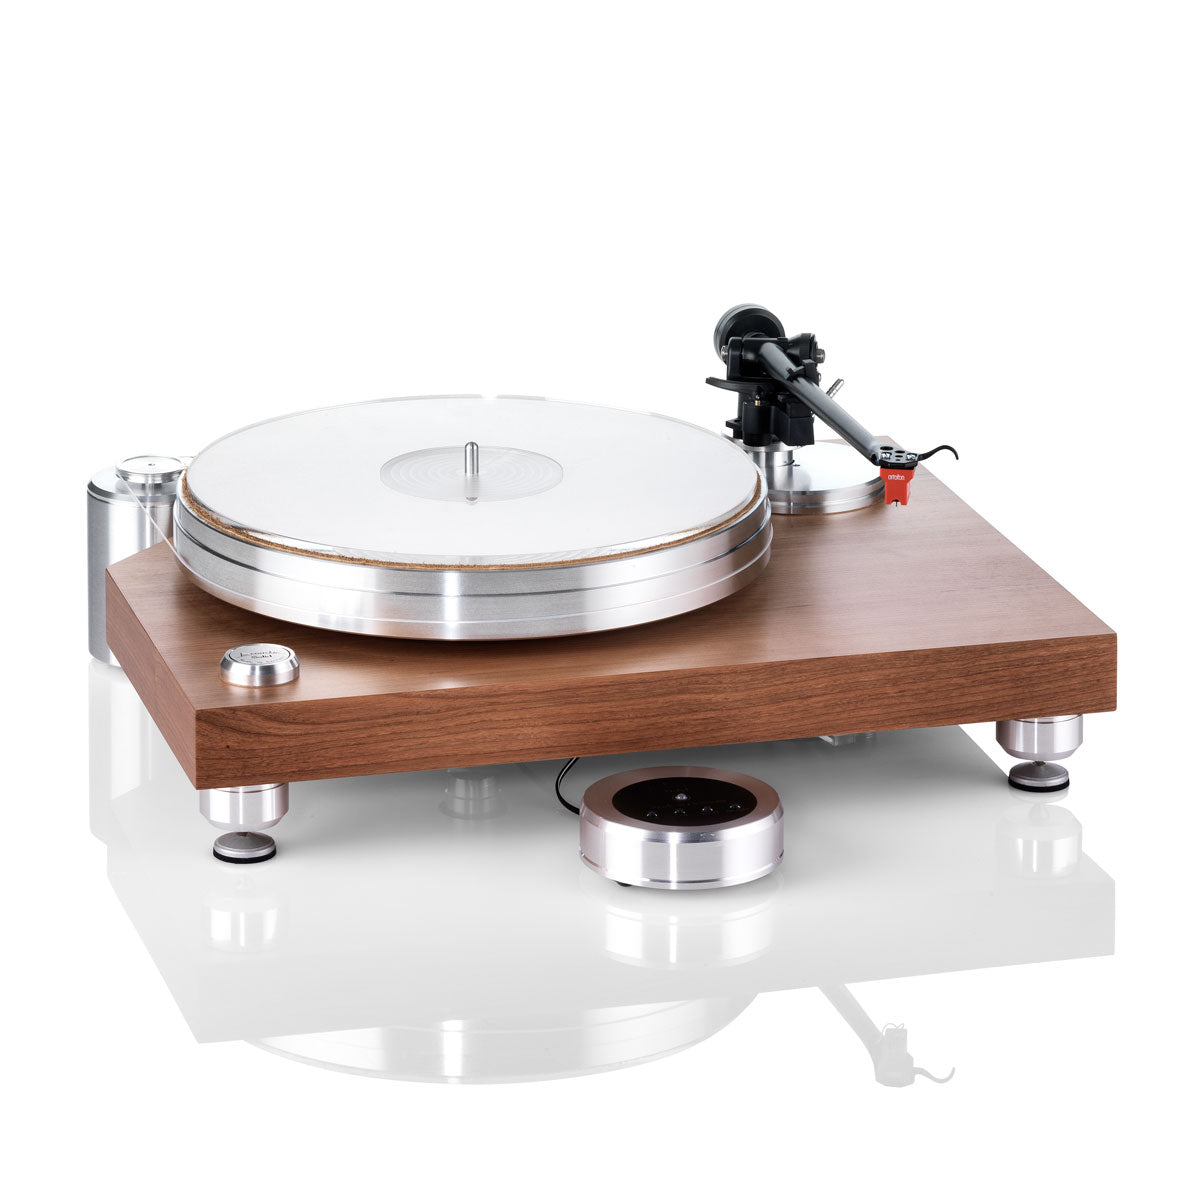 ACOUSTIC SOLID - SOLID CLASSIC WOOD TURNTABLE - Experience a listening pleasure in perfection with the High-quality technology and acoustics with Acoustic Solid. Best price at Vinyl Sound for all Acoustic Solid Turntables, Cartridges, tonearms and Phono Amplifiers: Acoustic Solid - Solid Brake - Acoustic Solid - Solid Machine – Acoustic Solid - Solid Edition – Acoustic Solid - Solid Royal – Acoustic Solid - Solid Stand